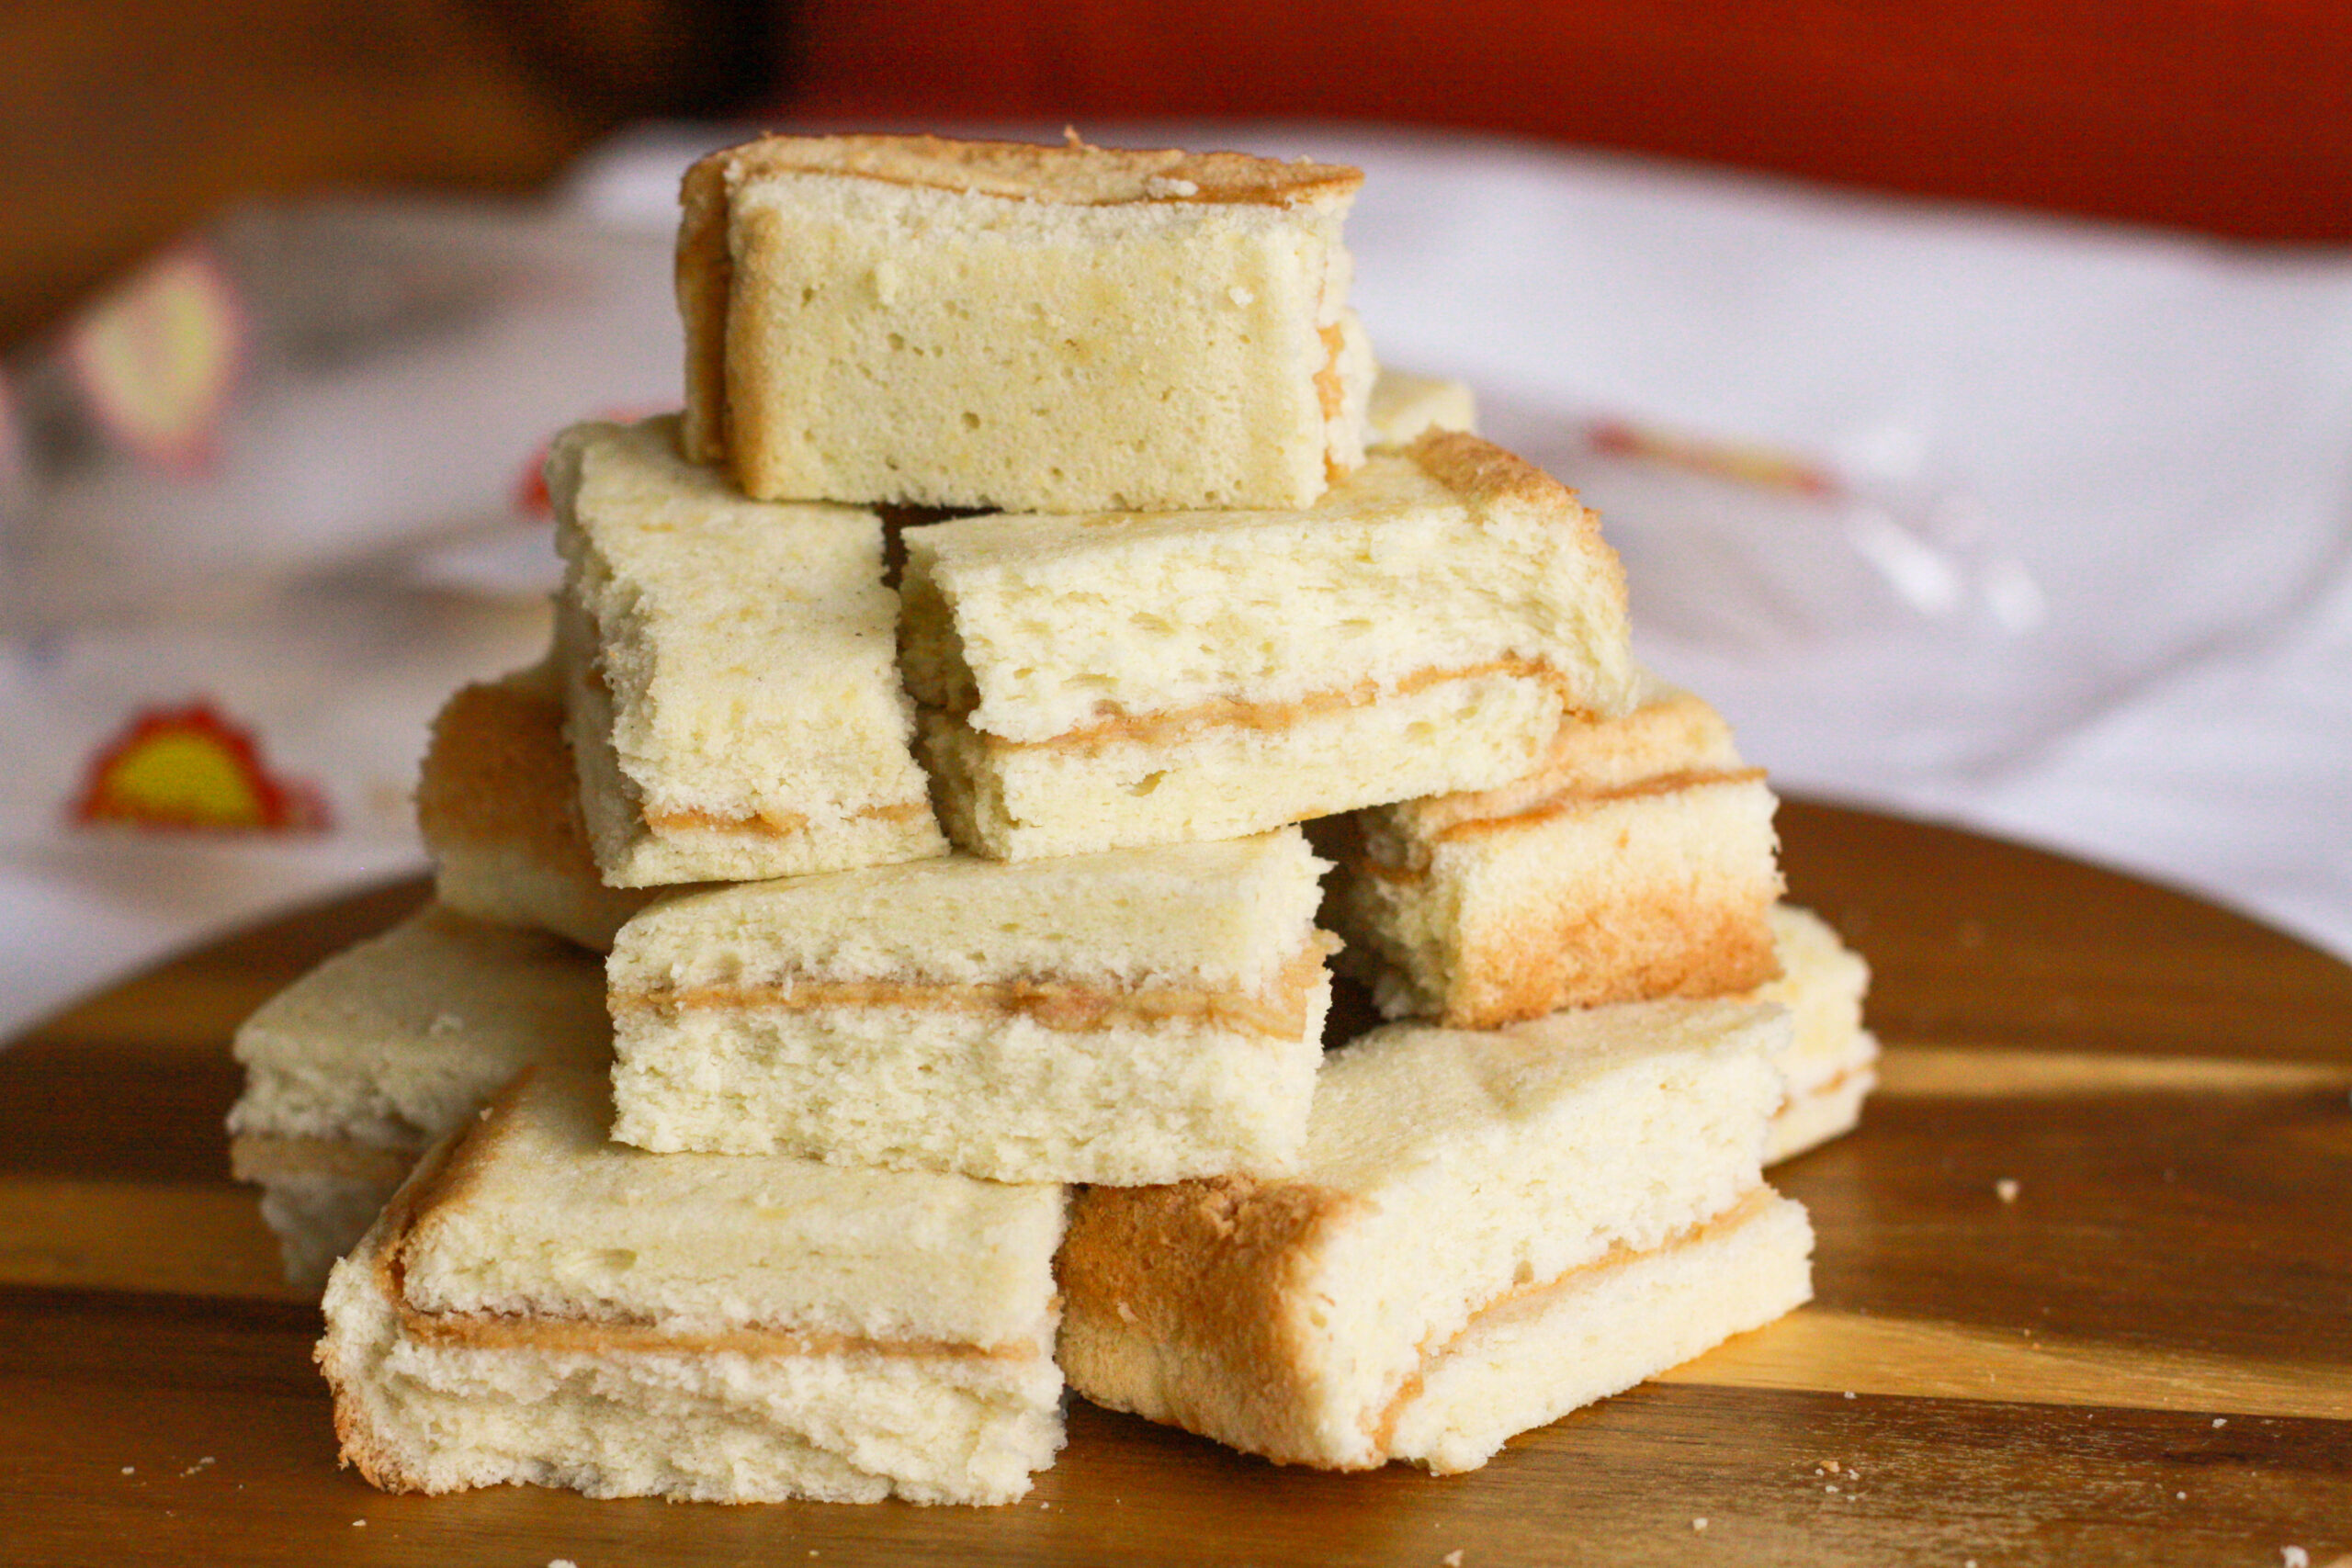 Pressed Sandwich Cake - Inipit from Pies Basket